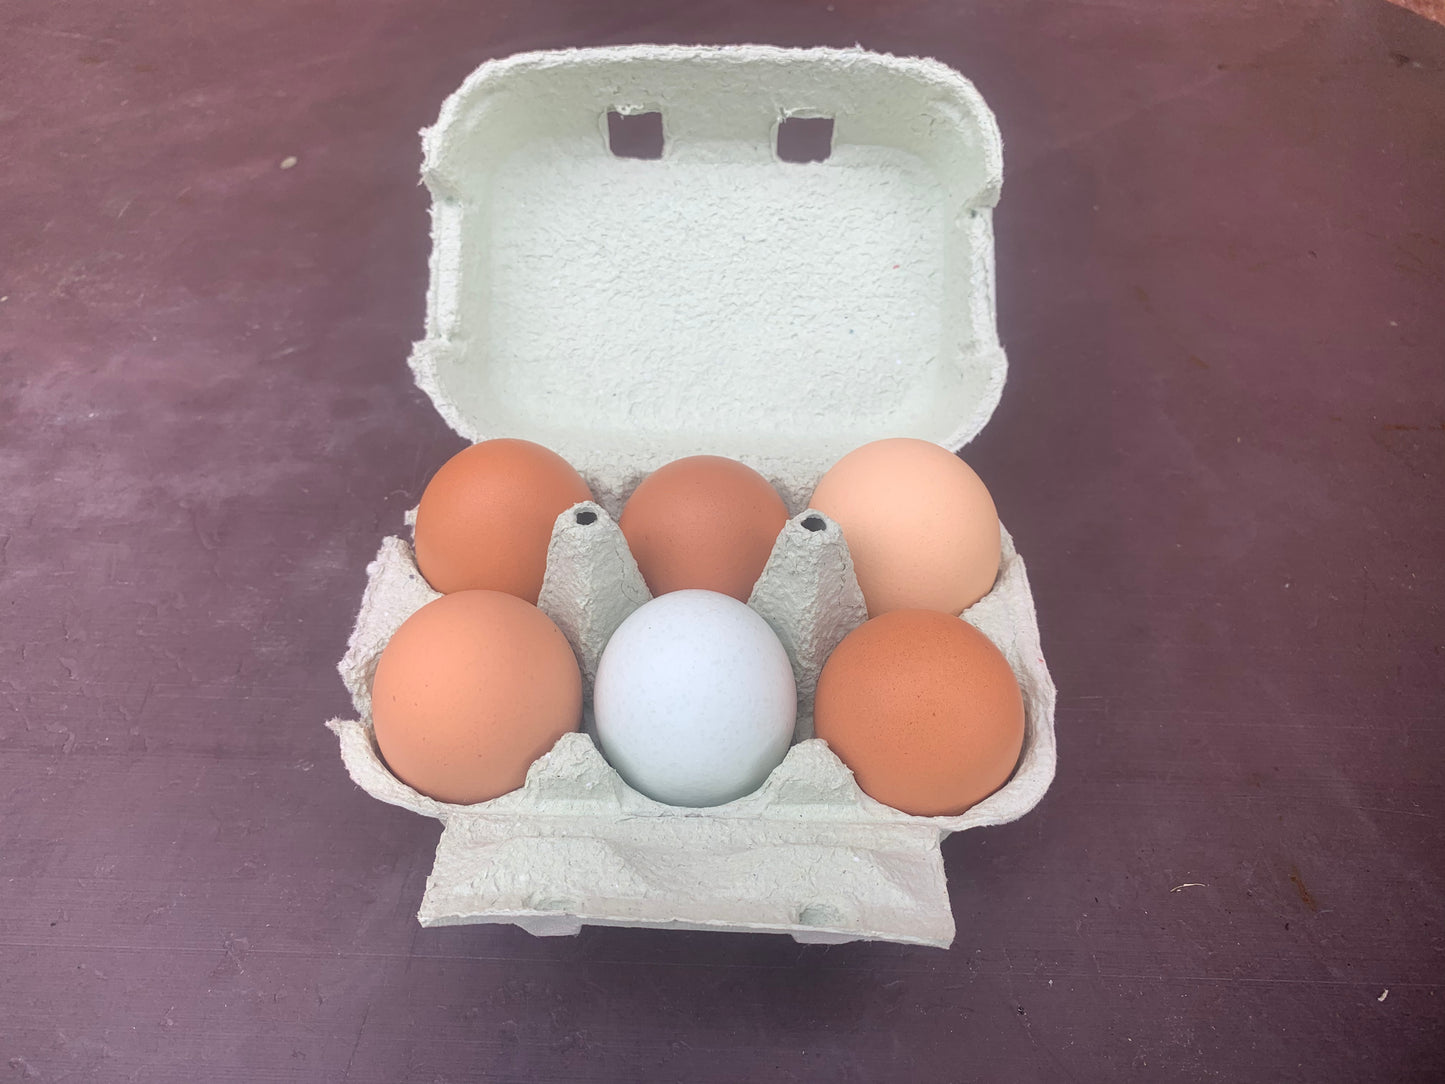 6 Hill Farm Eggs - local delivery or collection - please do not order if you are not in the stated local delivery areas as we cannot send by courier! Thanks :-)